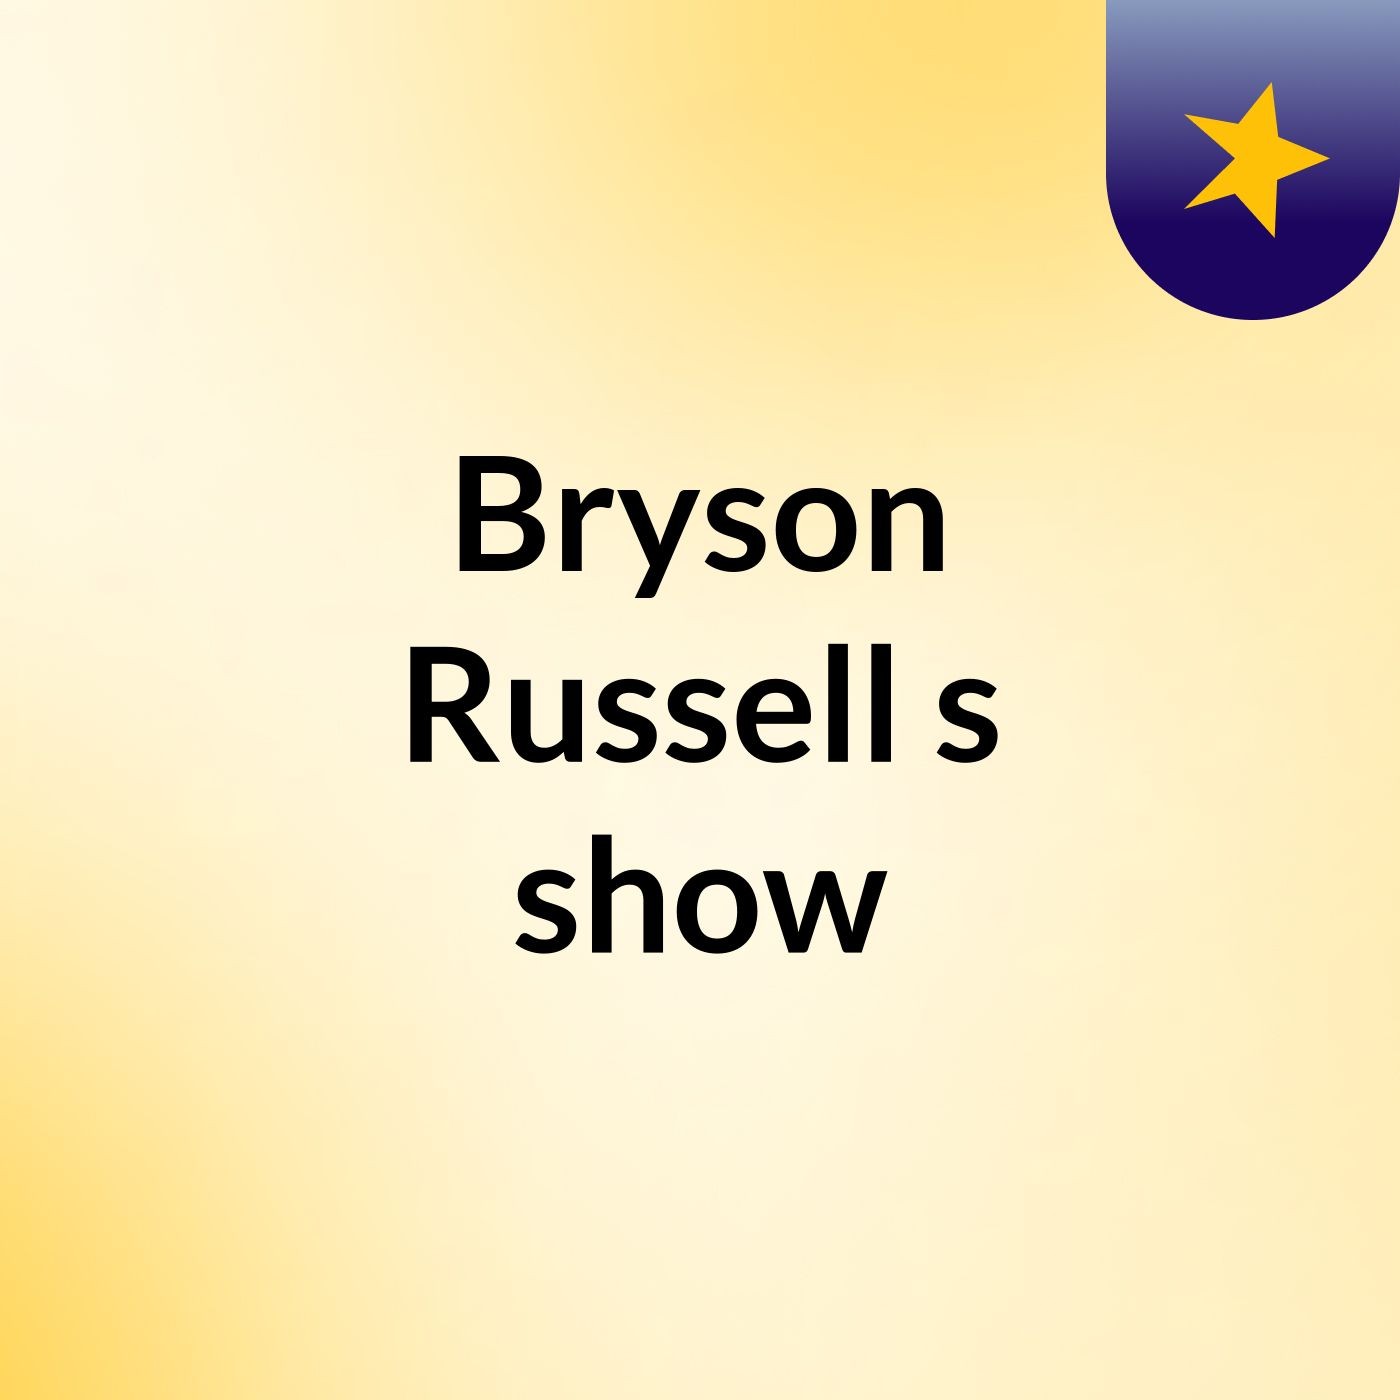 Bryson Russell's show